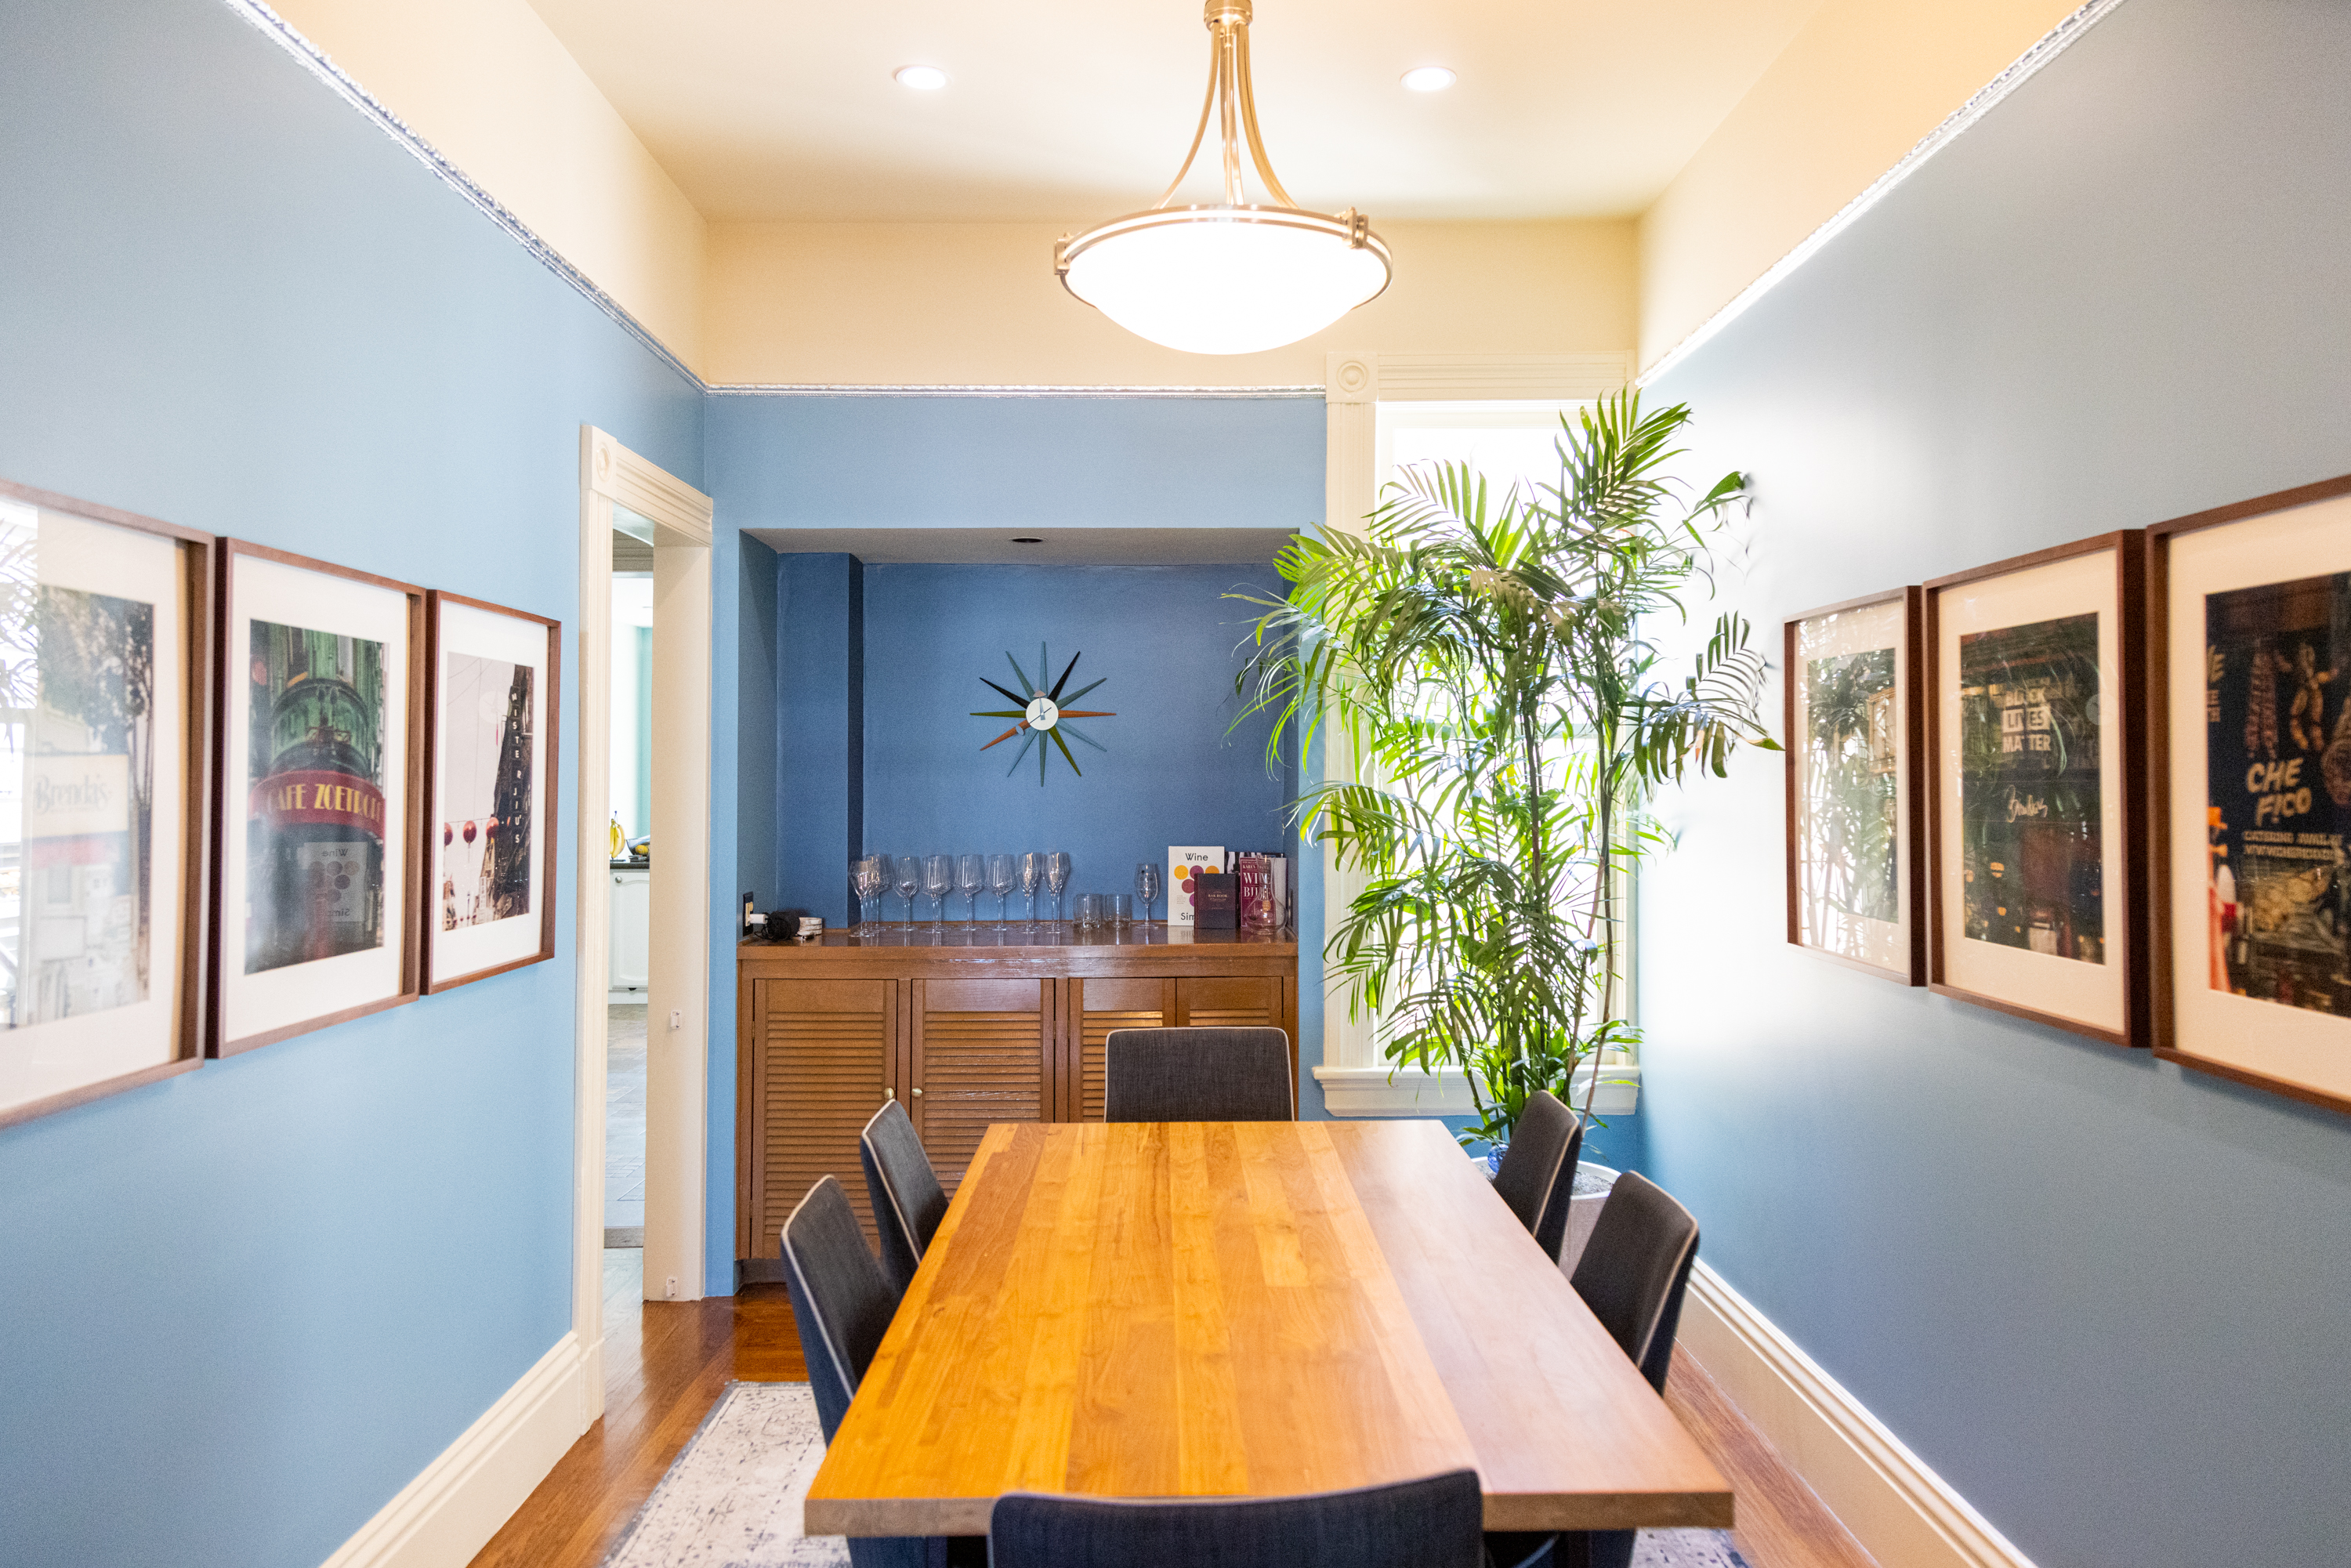 A dining room with a long wooden table, blue walls, framed posters, and a mid-century style clock.